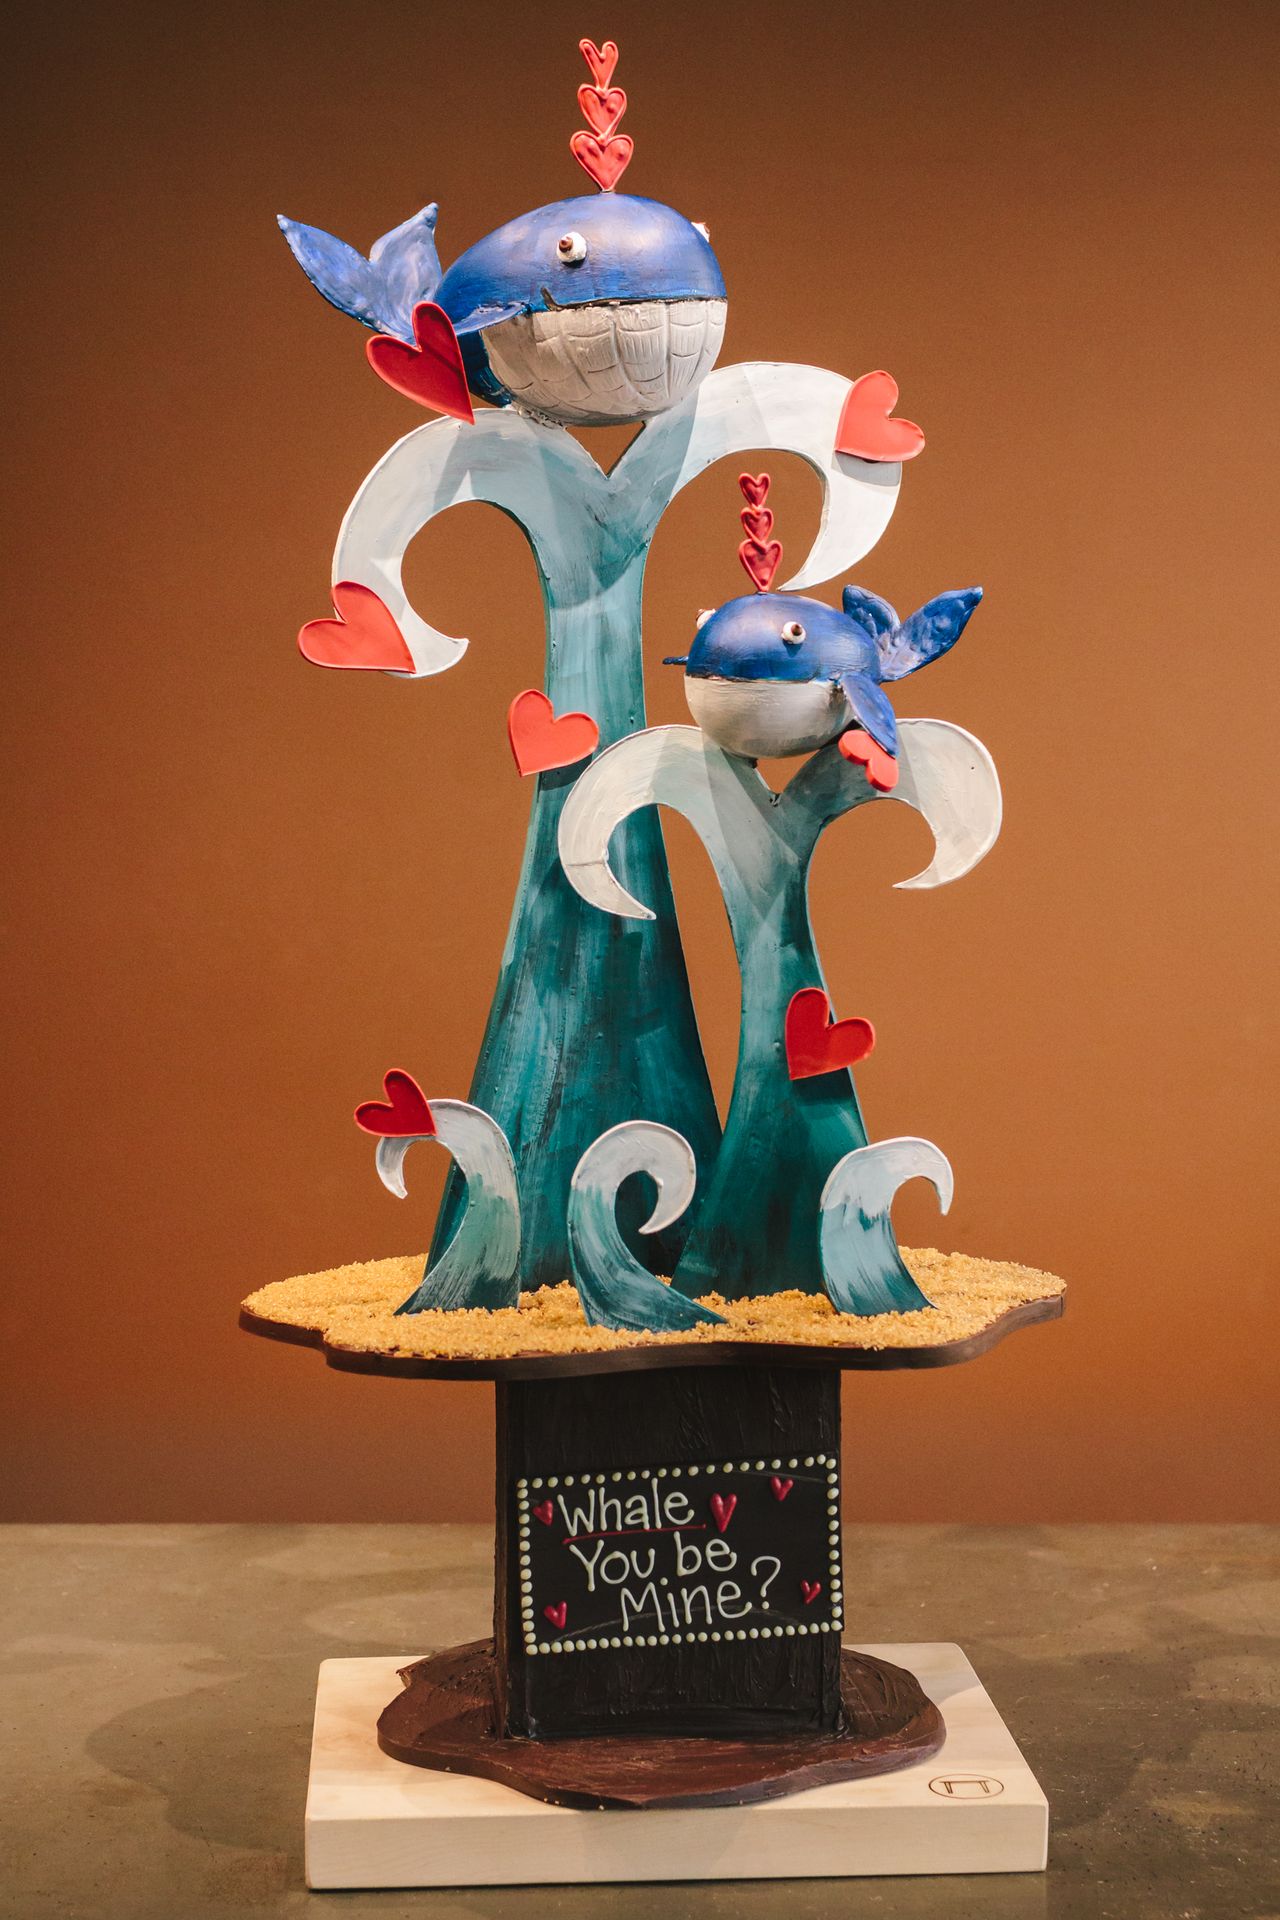 A large chocolate Valentine's sculpture featuring whales on abstract waves. At the bottom is the pun 'Whale You Be Mine?'